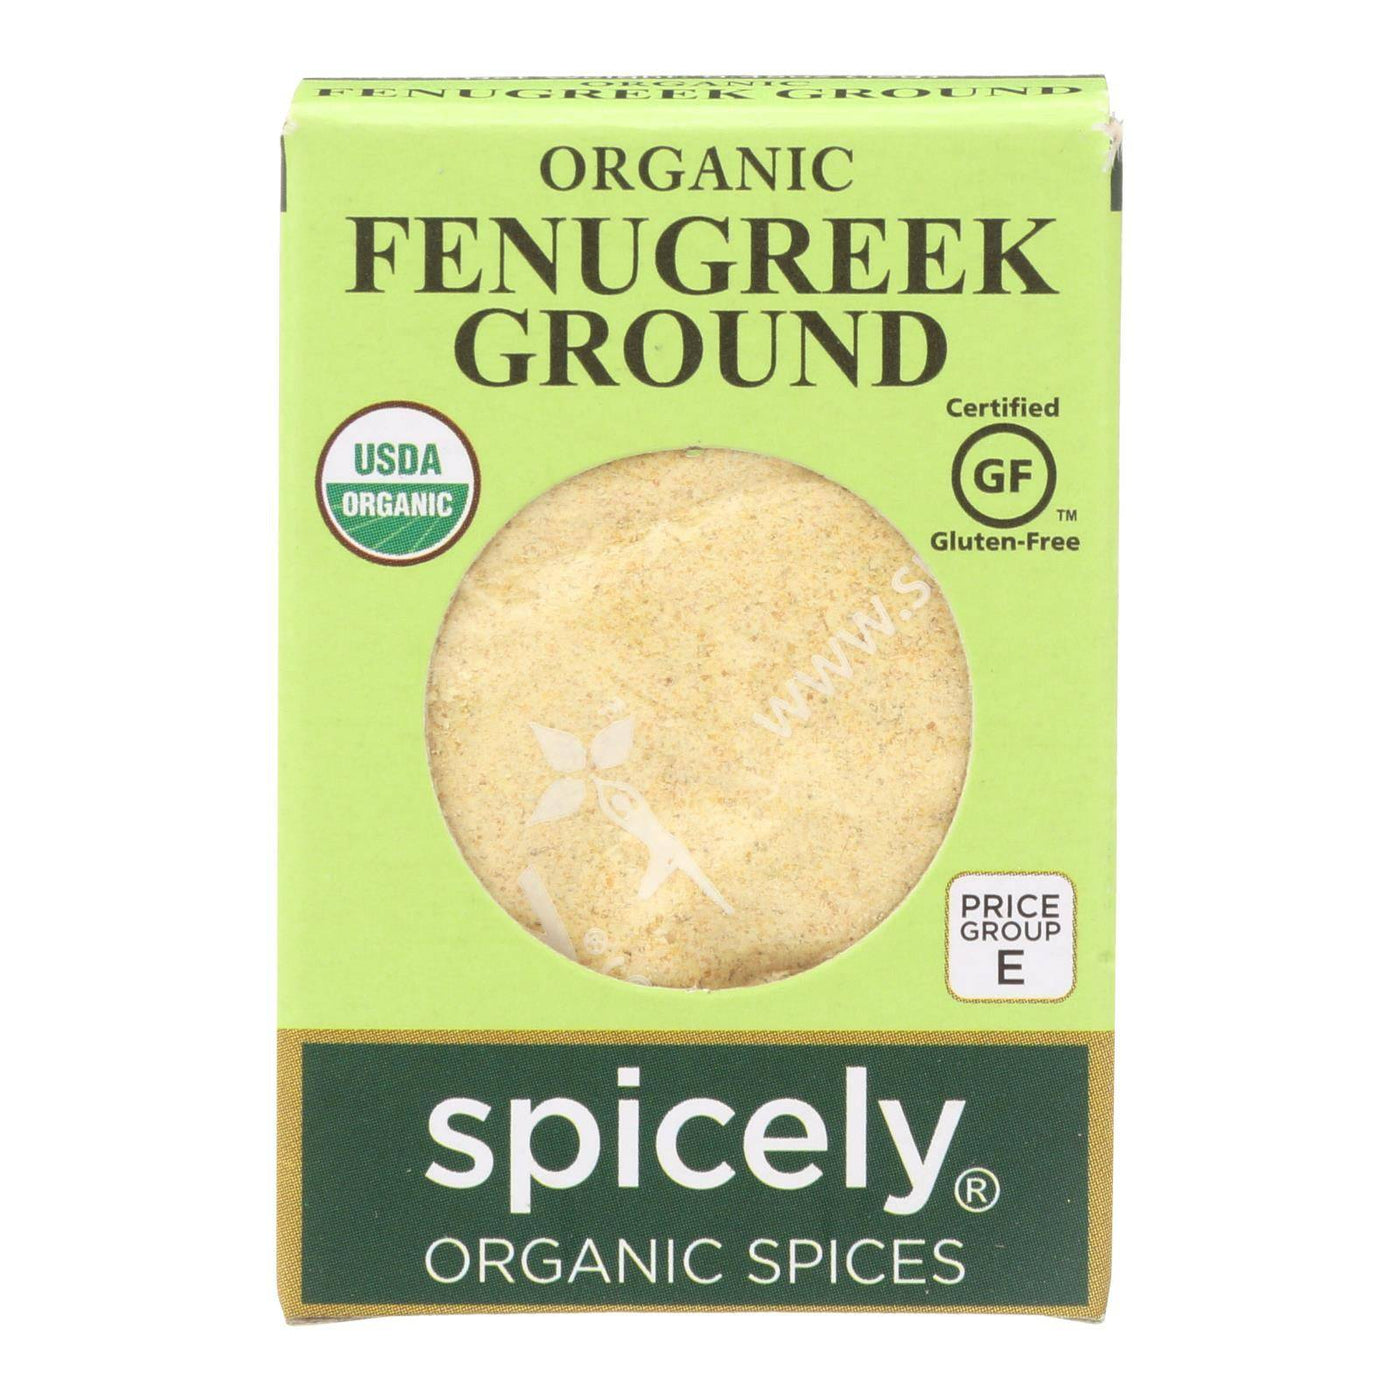 Buy Spicely Organics - Organic Fenugreek - Ground - Case Of 6 - 0.45 Oz.  at OnlyNaturals.us